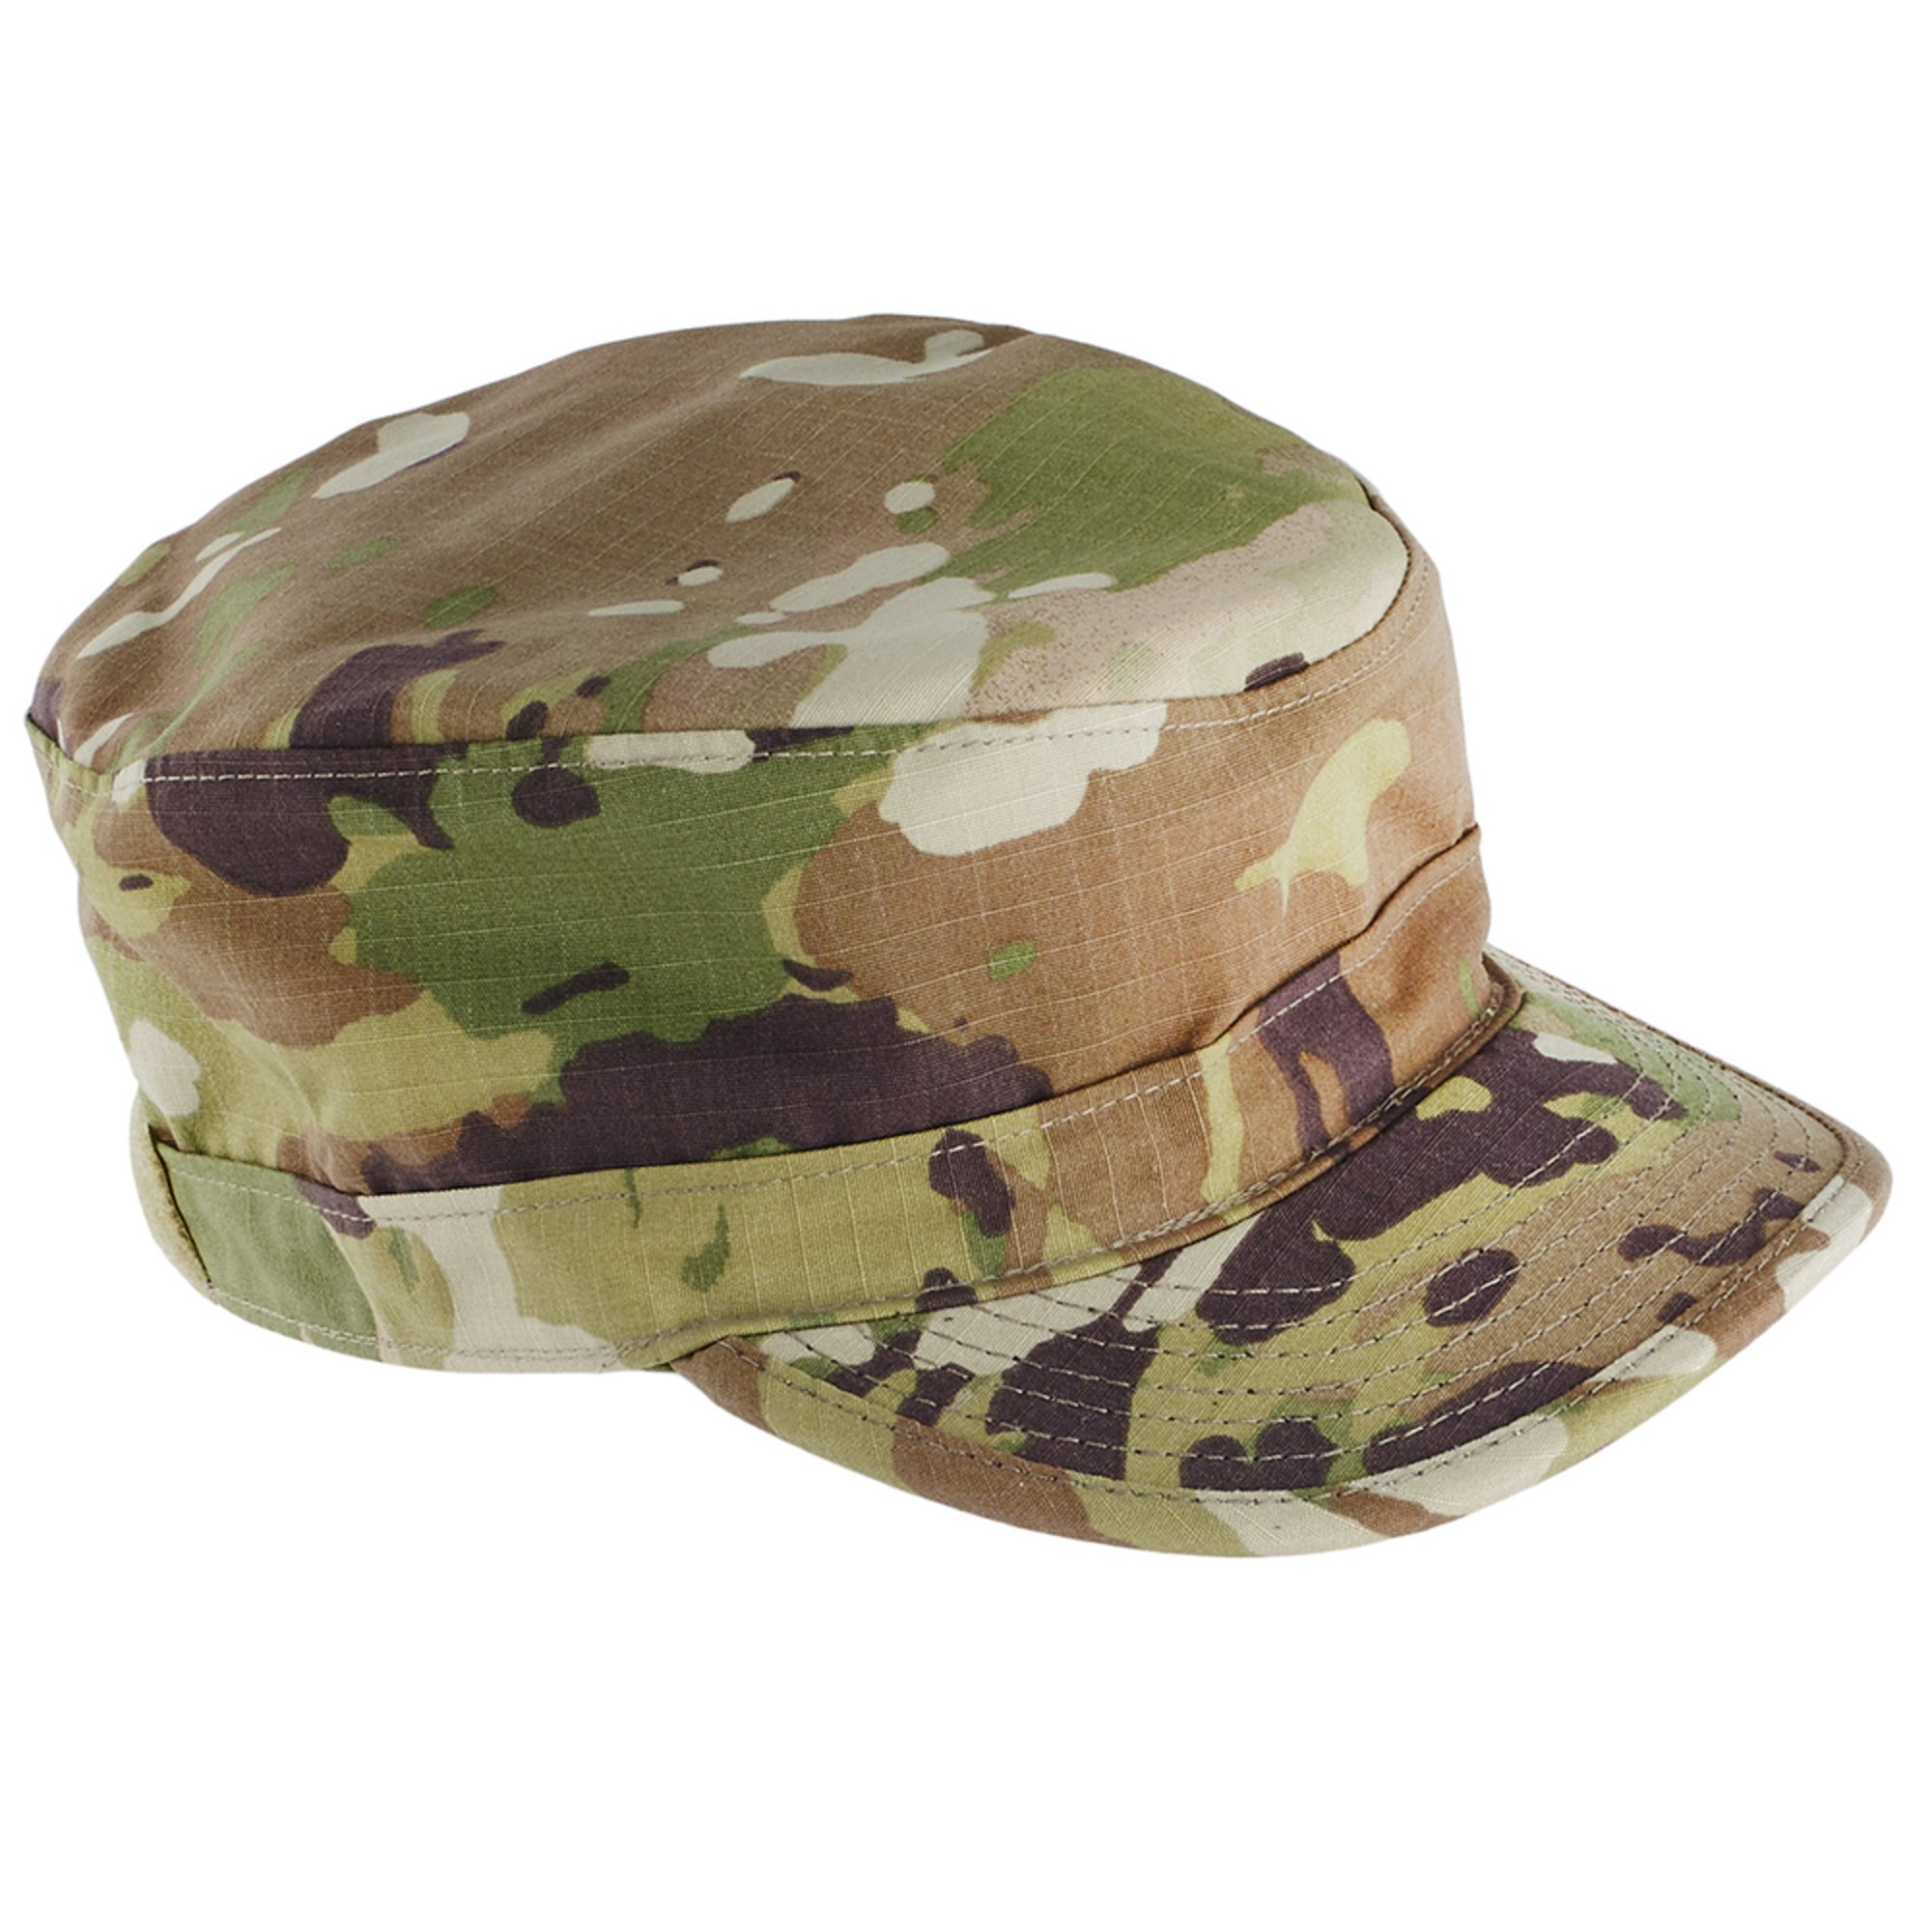 Acu-ocp Patrol Cap | Air Force | Military - Shop Your Navy Exchange ...